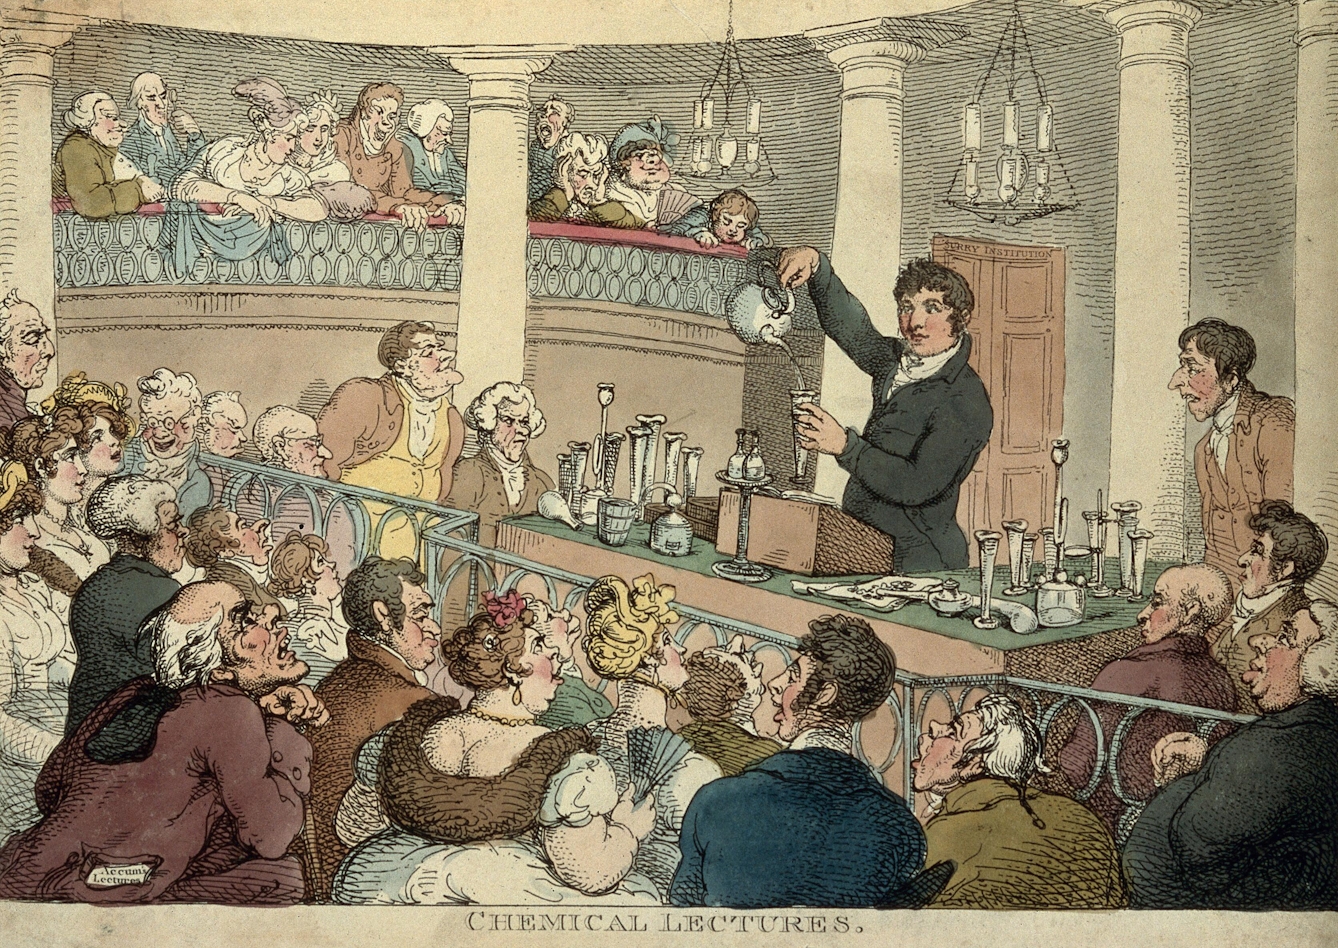 Caricature colour print of a young man giing a scientific demonstration to a rapt audience of wealthy early 19th century men and women in a lecture theatre. He is pouring a liquid into a scientific glass vessel from a kettle.